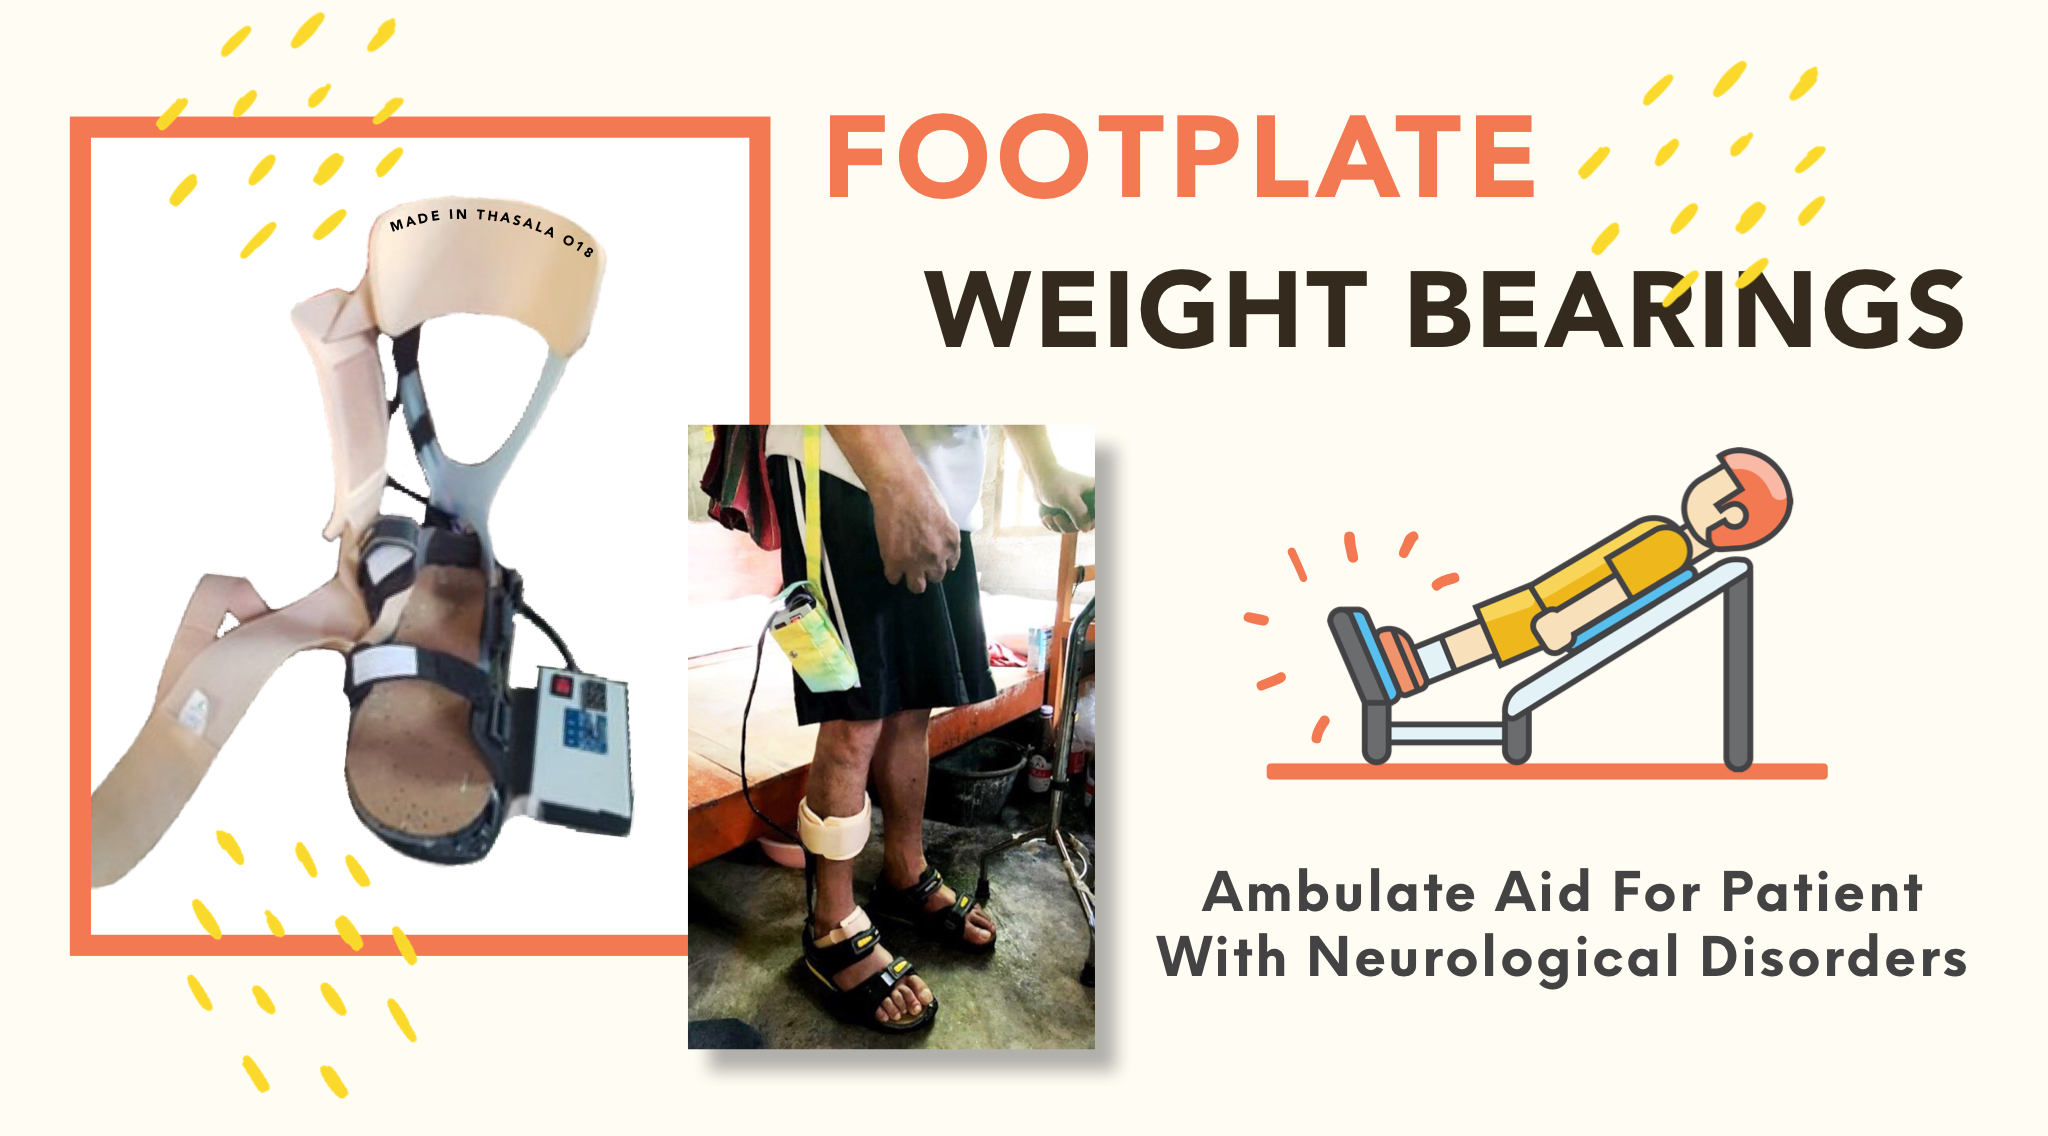 Foot Plate Weight Bearing – Ambulate aid for patient with neurological disorders